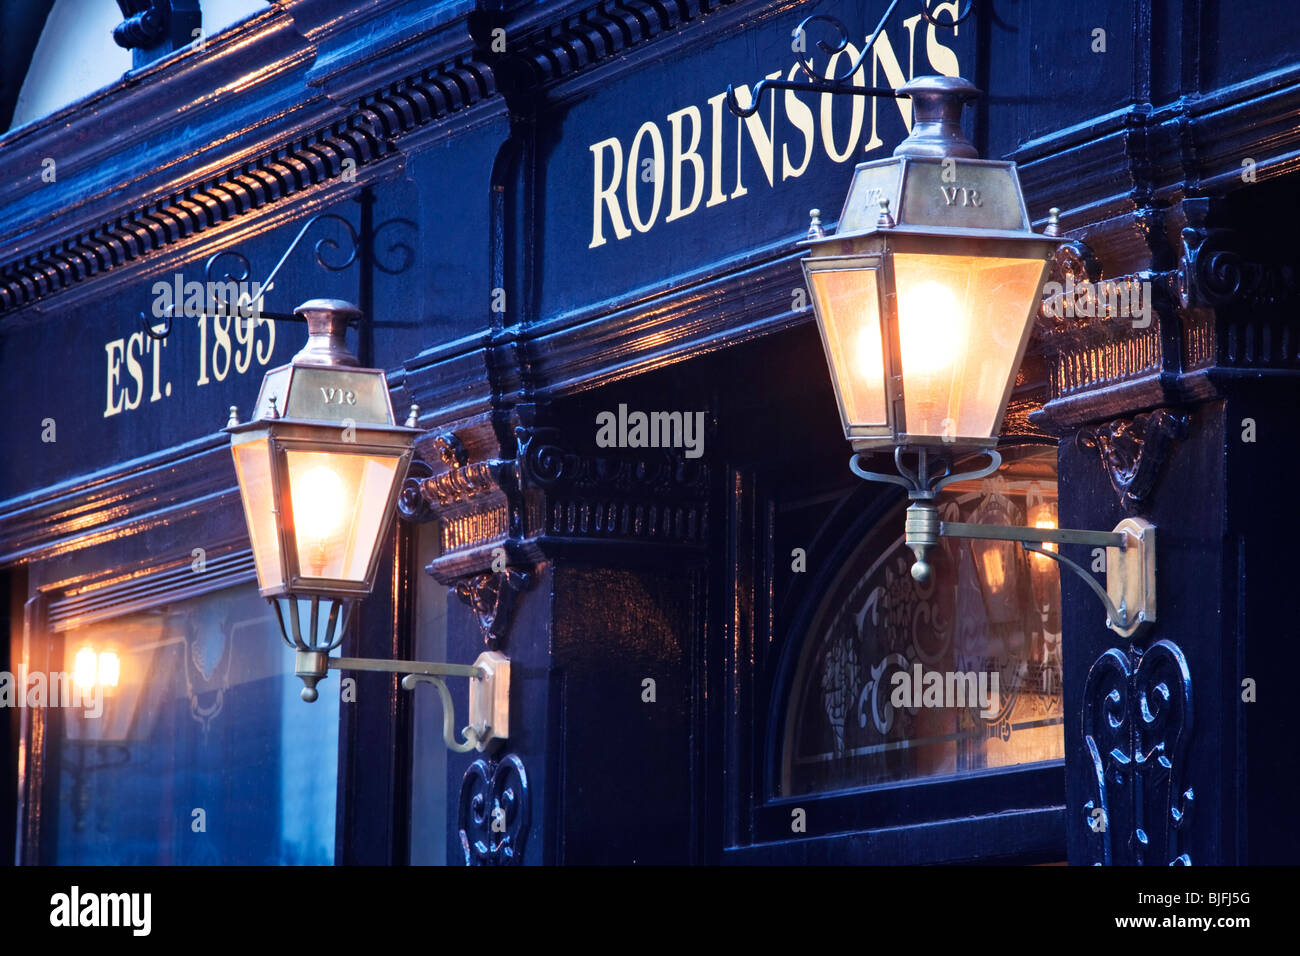 Carriage lights outside Robinsons public house on Great Victoria Street, Belfast, Northern Ireland Stock Photo